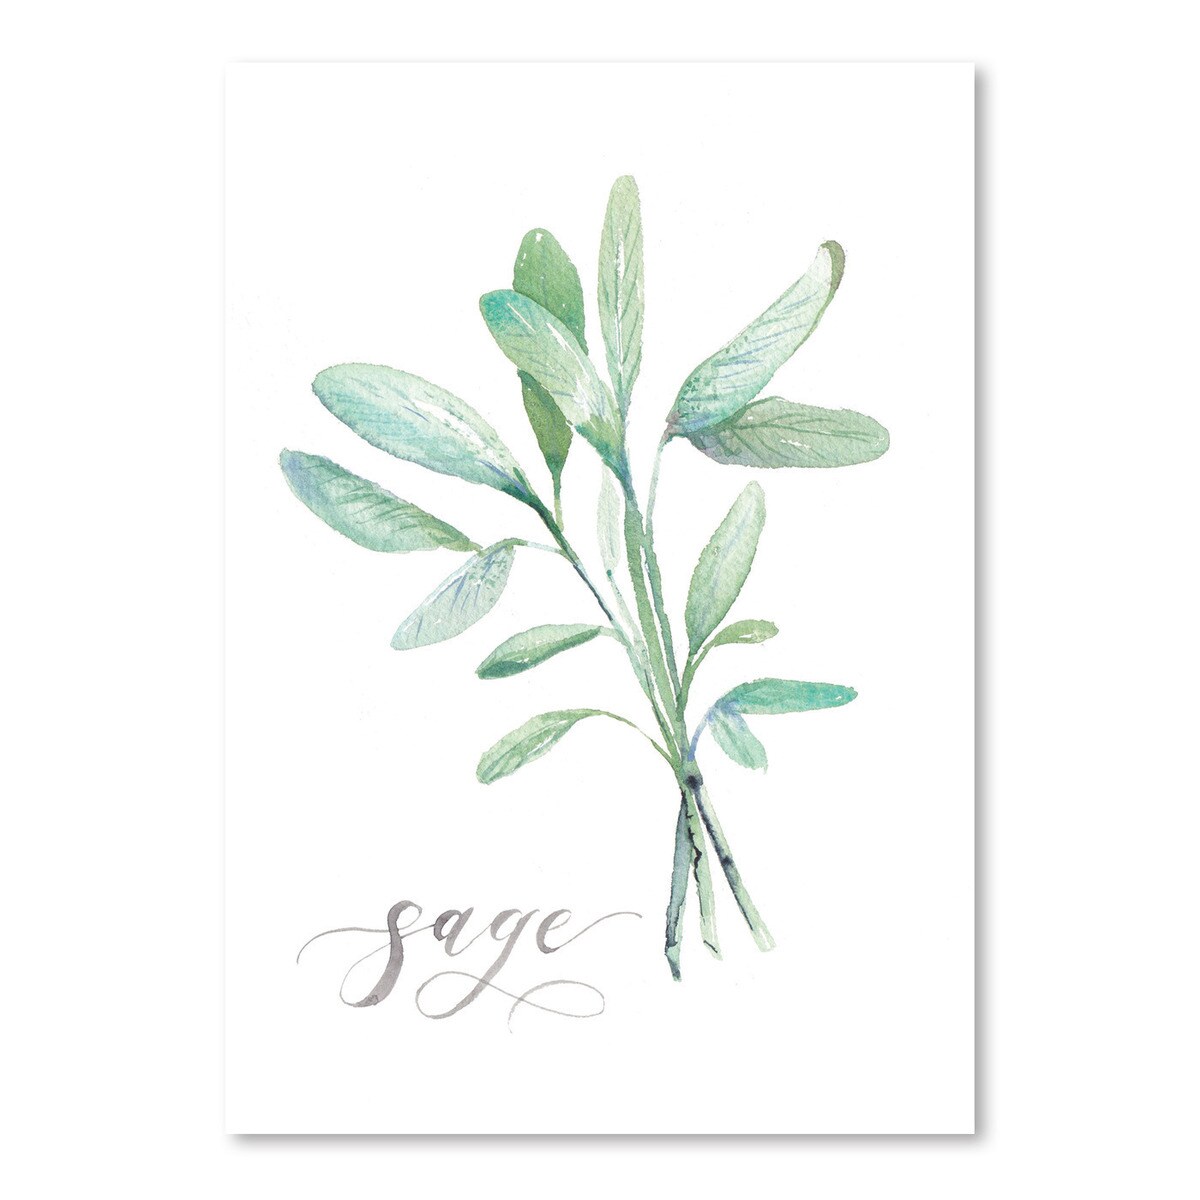 Sage by Cami Monet  Poster Art Print - Americanflat